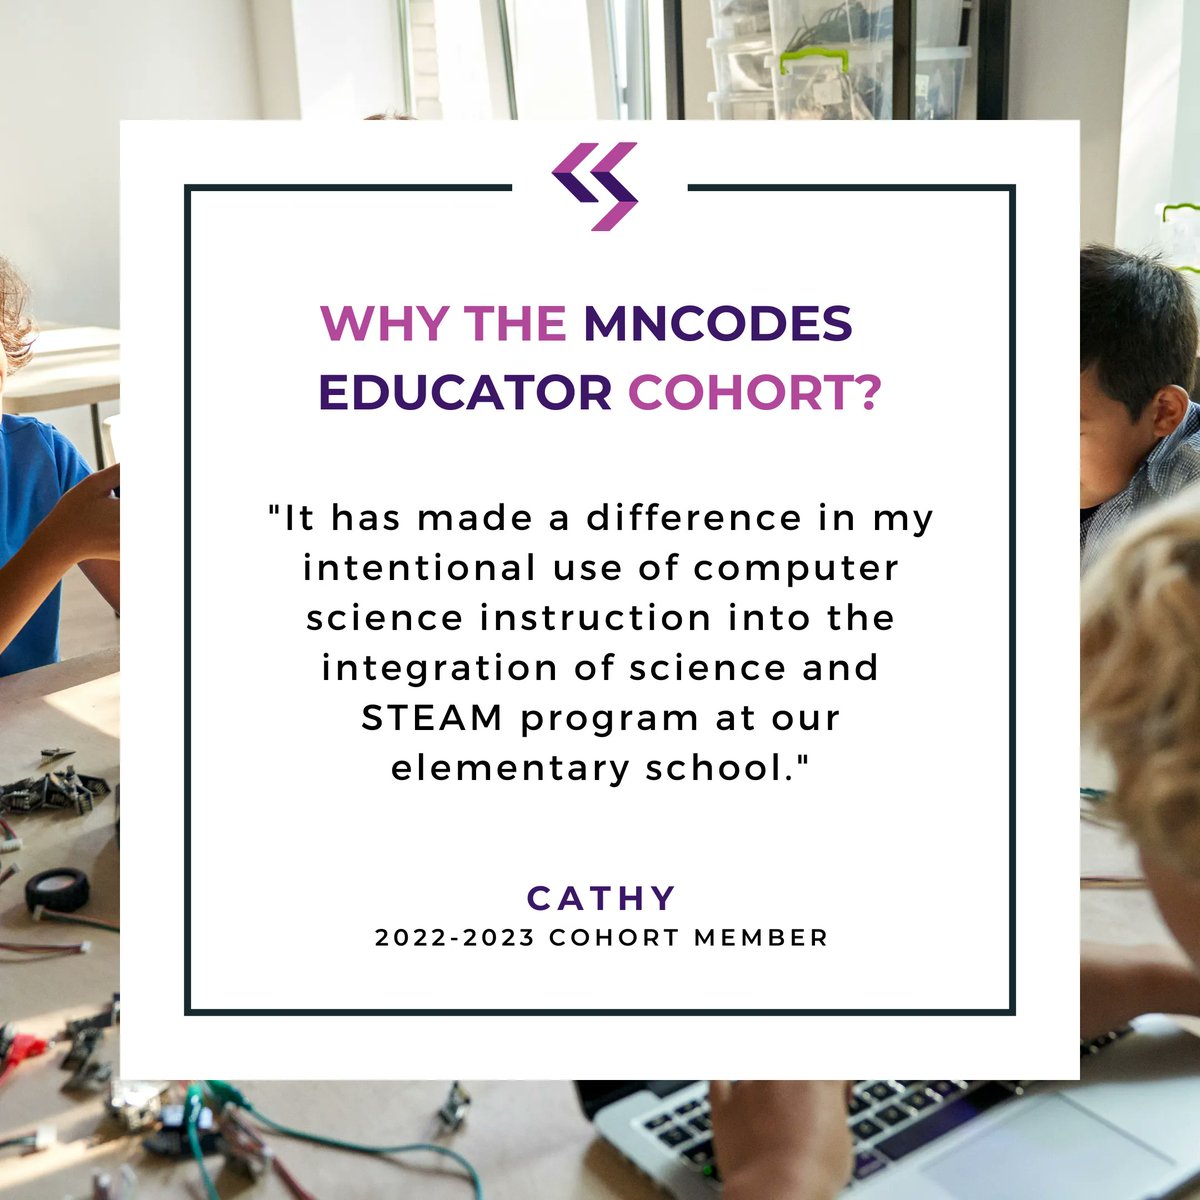 🗣️✨ Check out this powerful testimonial from one of our amazing 2022-2023 cohort members. 

Join us for our 2023-2024 MNCodes Cohort! Apply today and bring new CS opportunities to your students.  👩‍💻👨‍💻

buff.ly/421eqmw 

#CSforAll #EducatorPD #CohortLearning #CodeSavvy